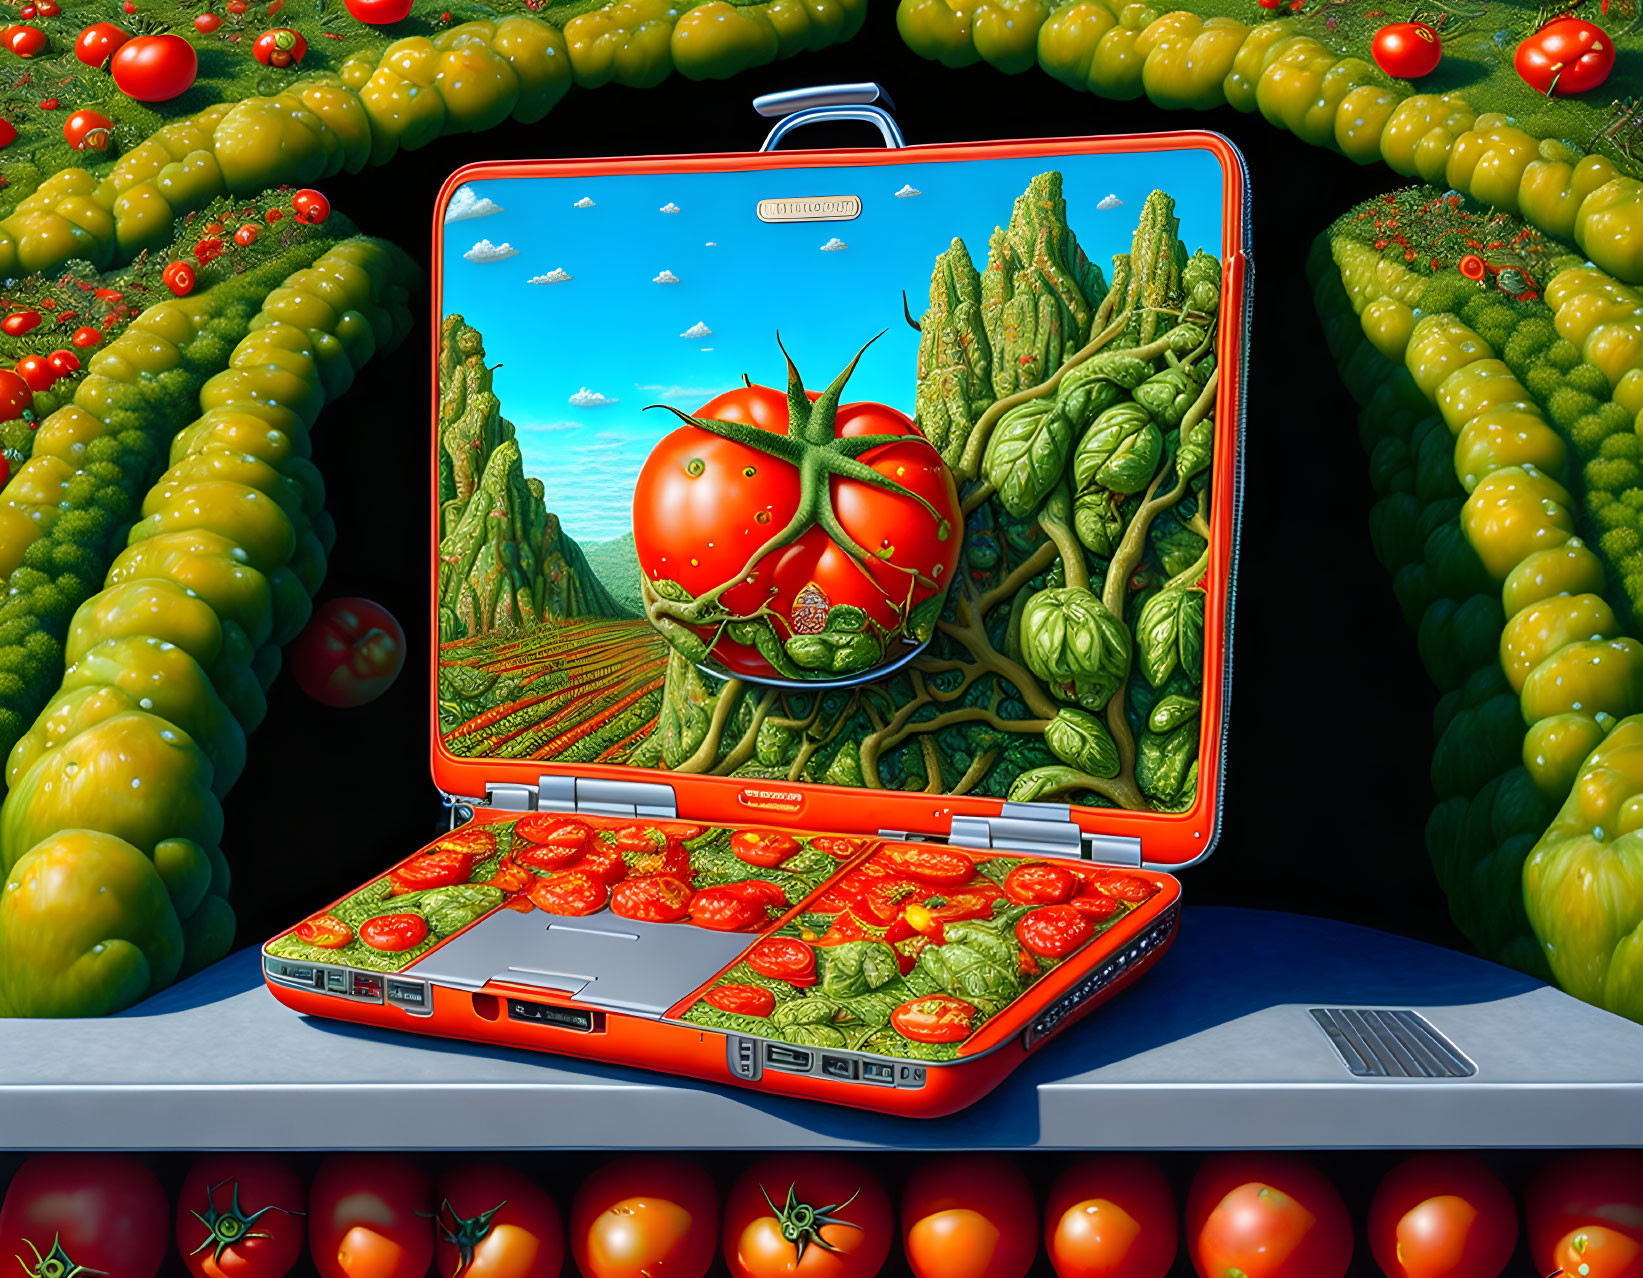 Tomato holding a laptop. extreme details, full fro